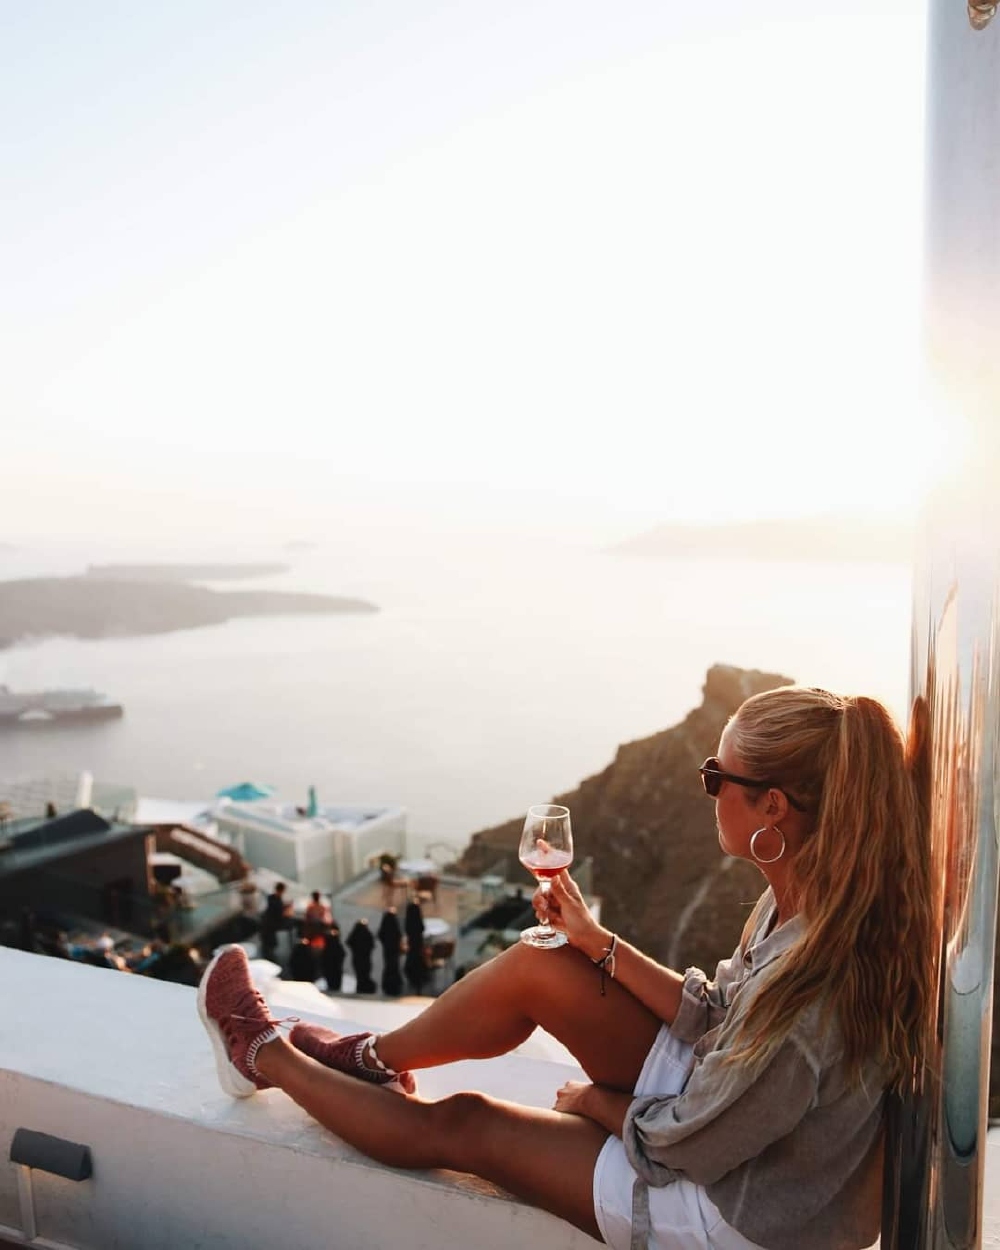 Bars, Cafes and Clubs in Santorini